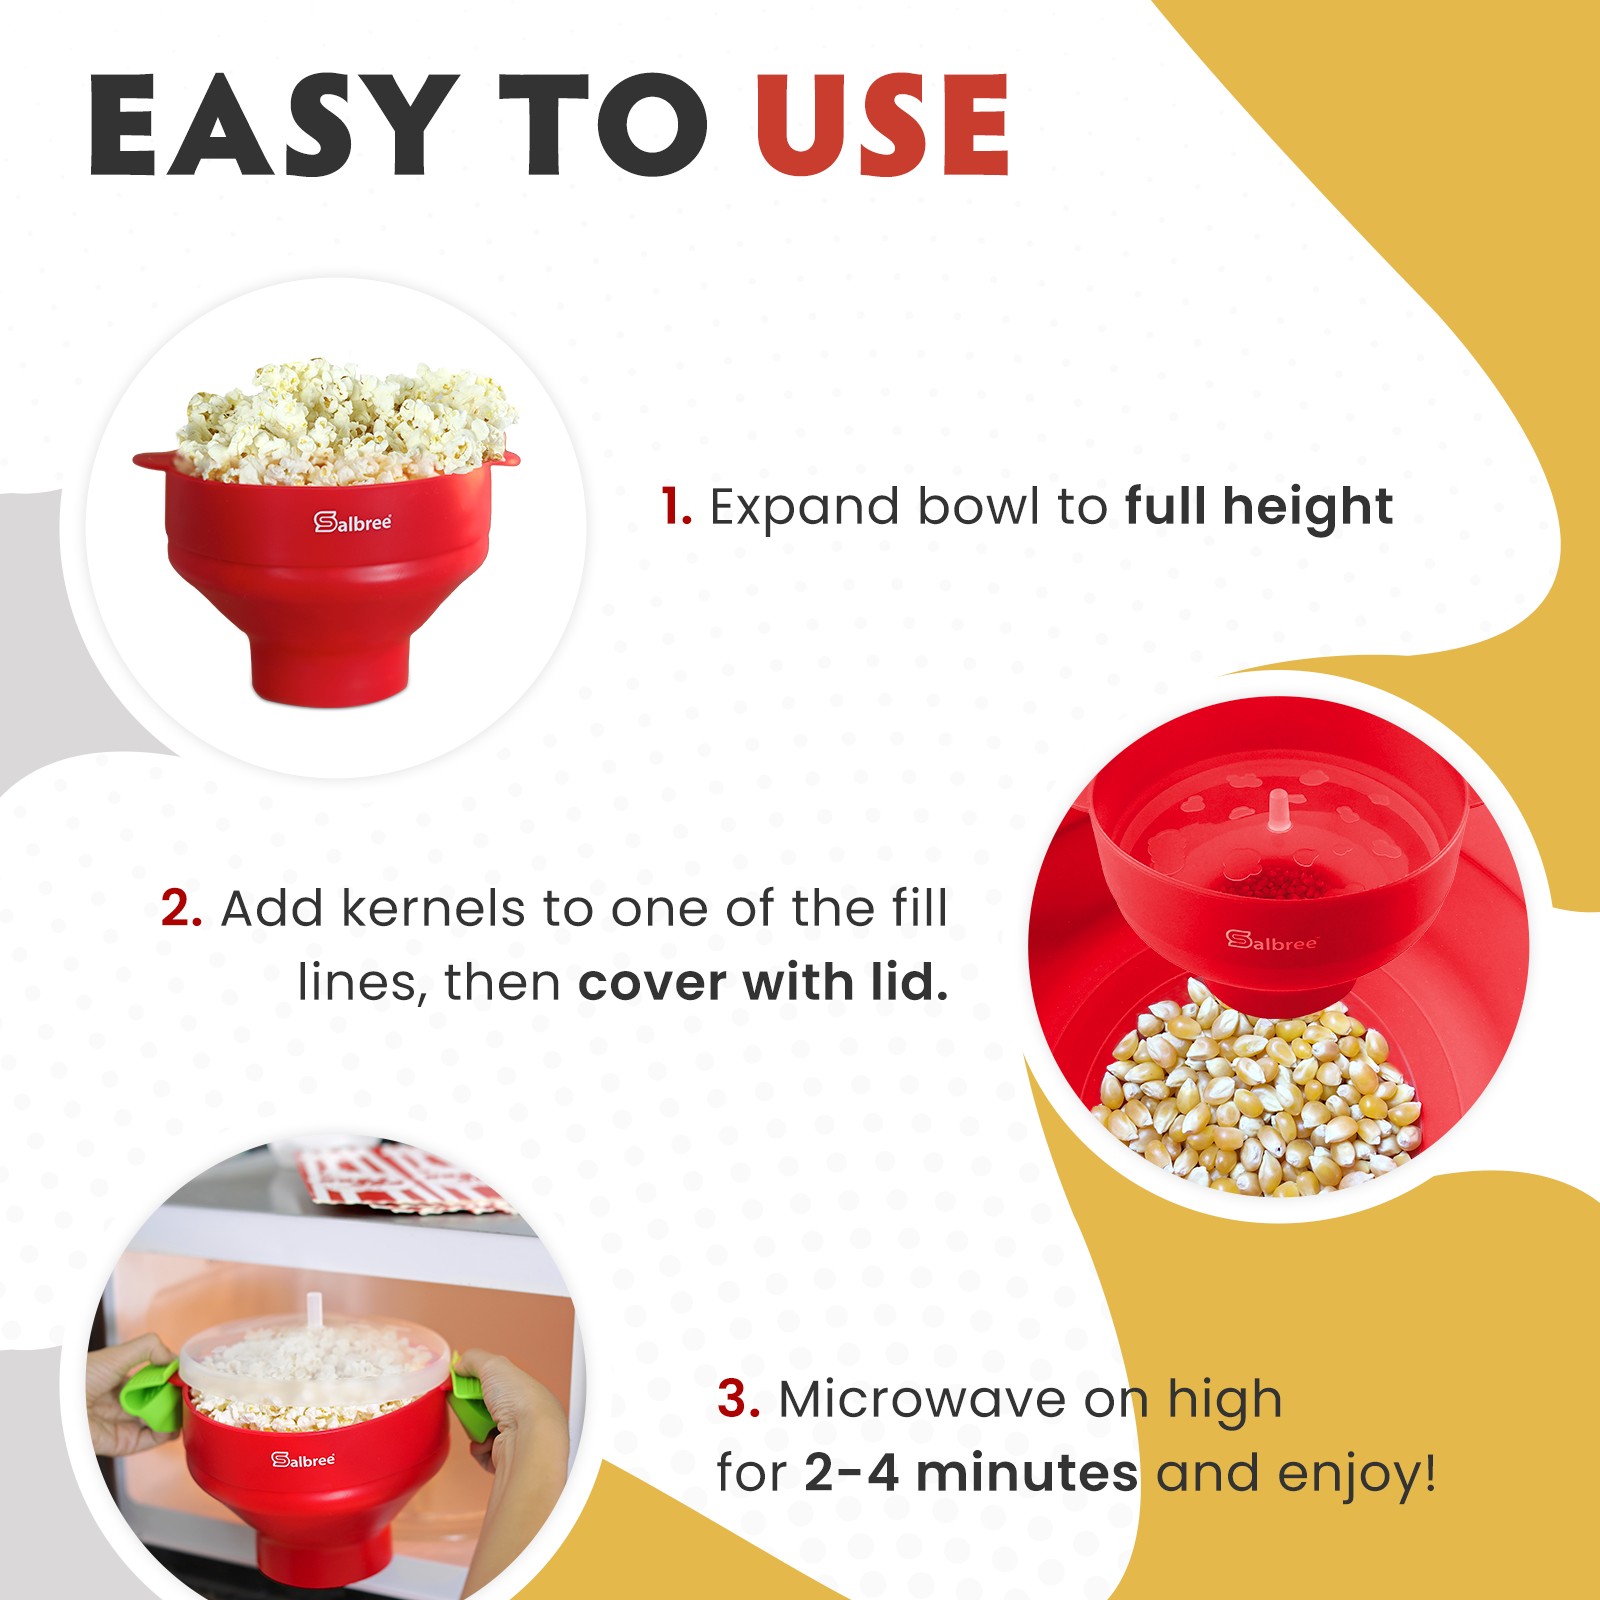  Collapsible Silicone Microwave Hot Air Popcorn Popper Bowl With  Lid and Handles - Red: Home & Kitchen